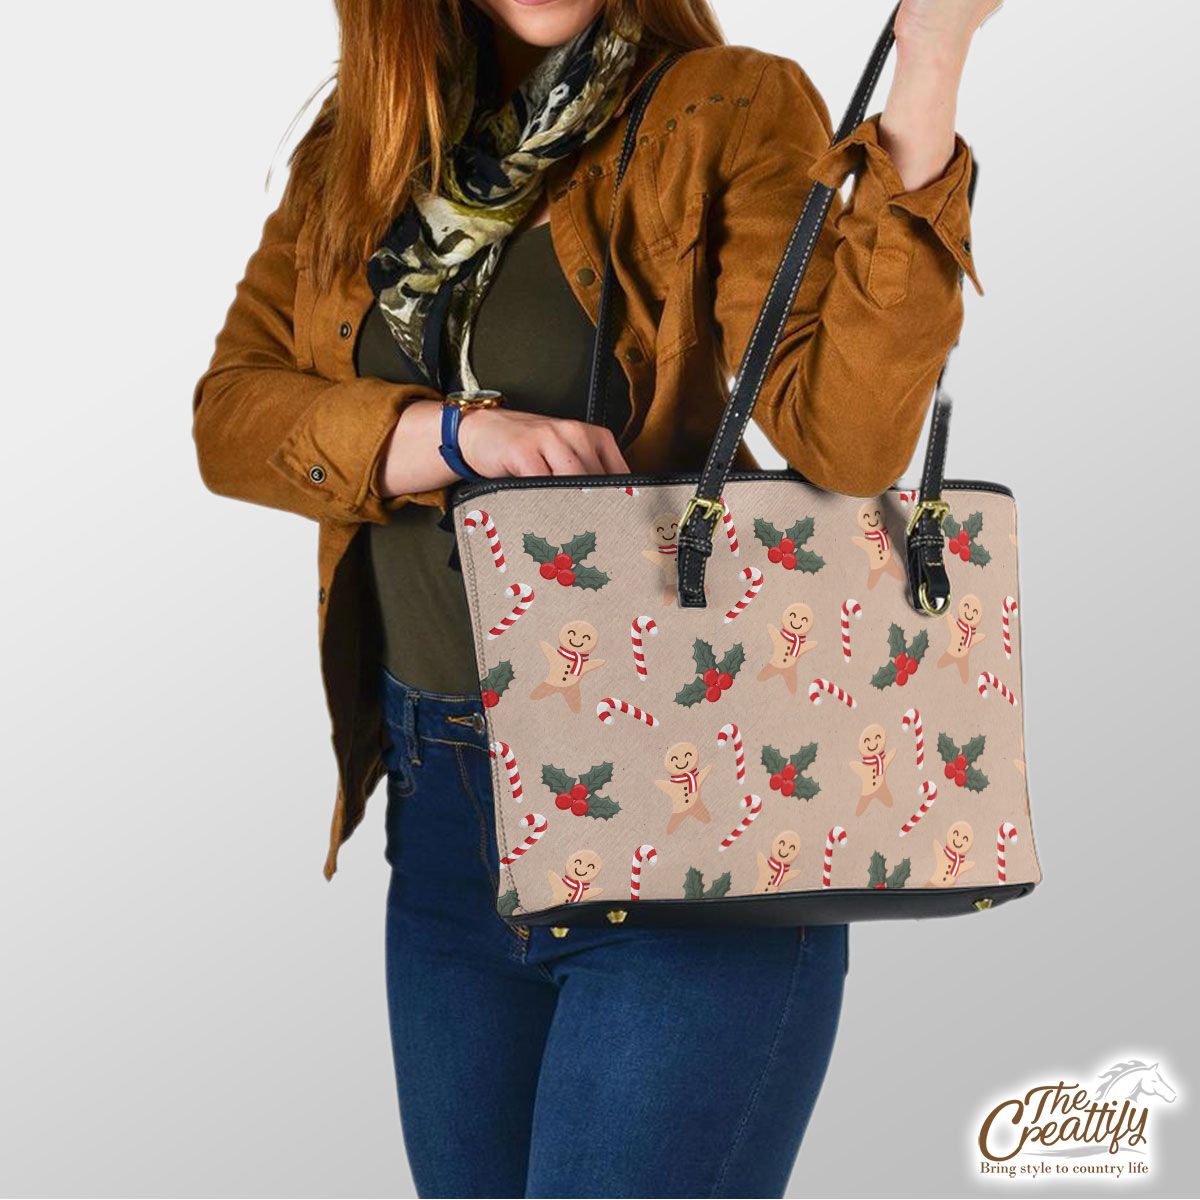 Candy Cane, Holly Leaf, Gingerbread Man Leather Tote Bag